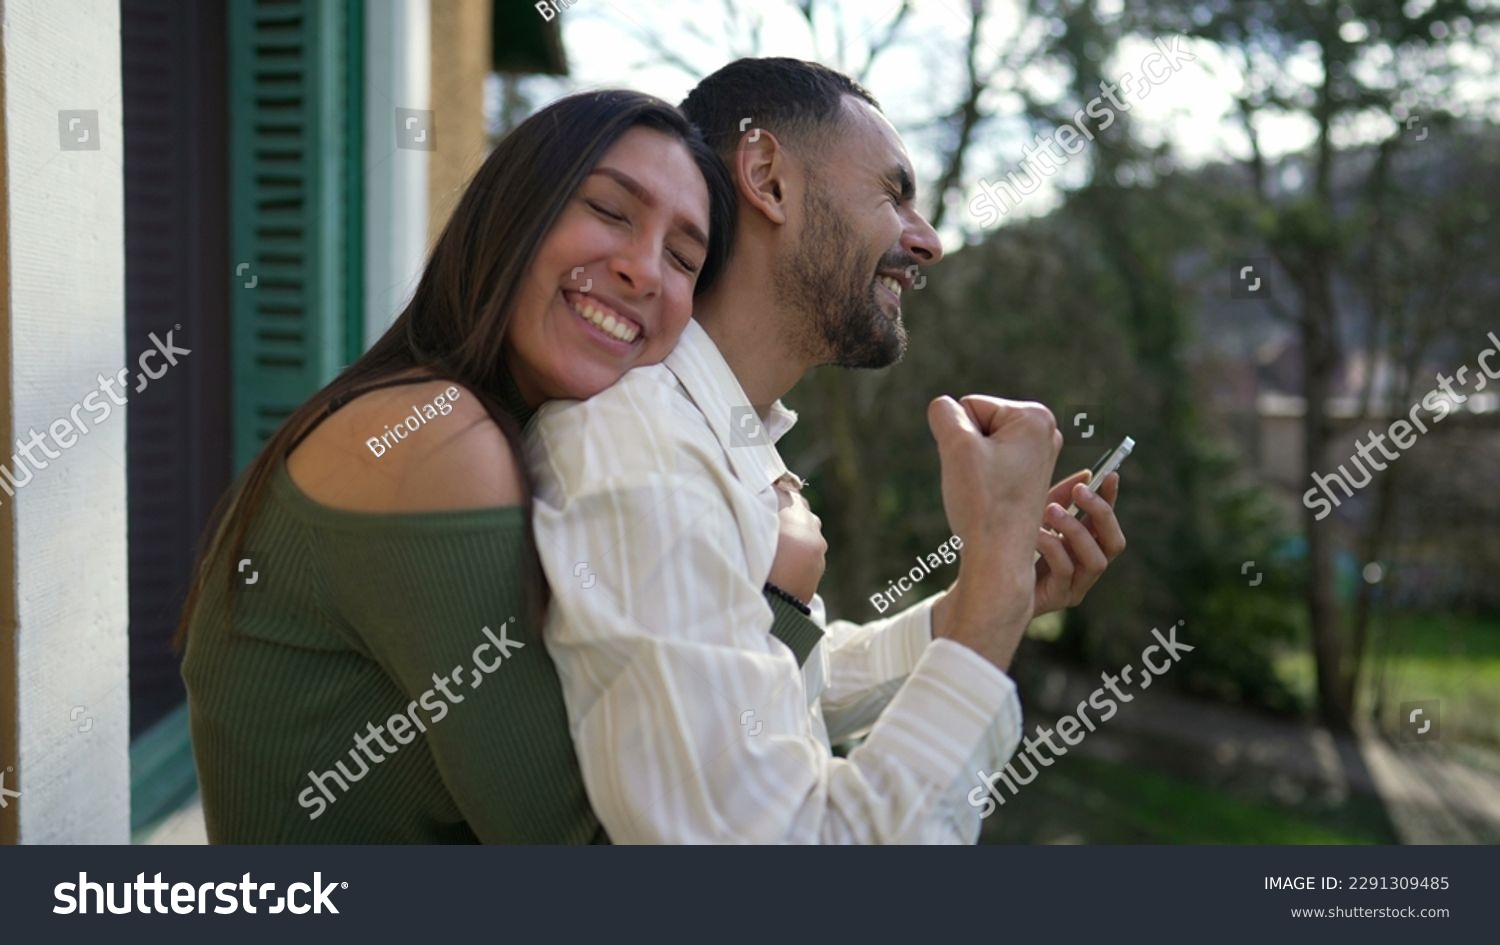 Happy couple celebrating success together. Girlfriend embraces elated boyfriend feeling triumphant. Successful man and woman showing support and happiness #2291309485